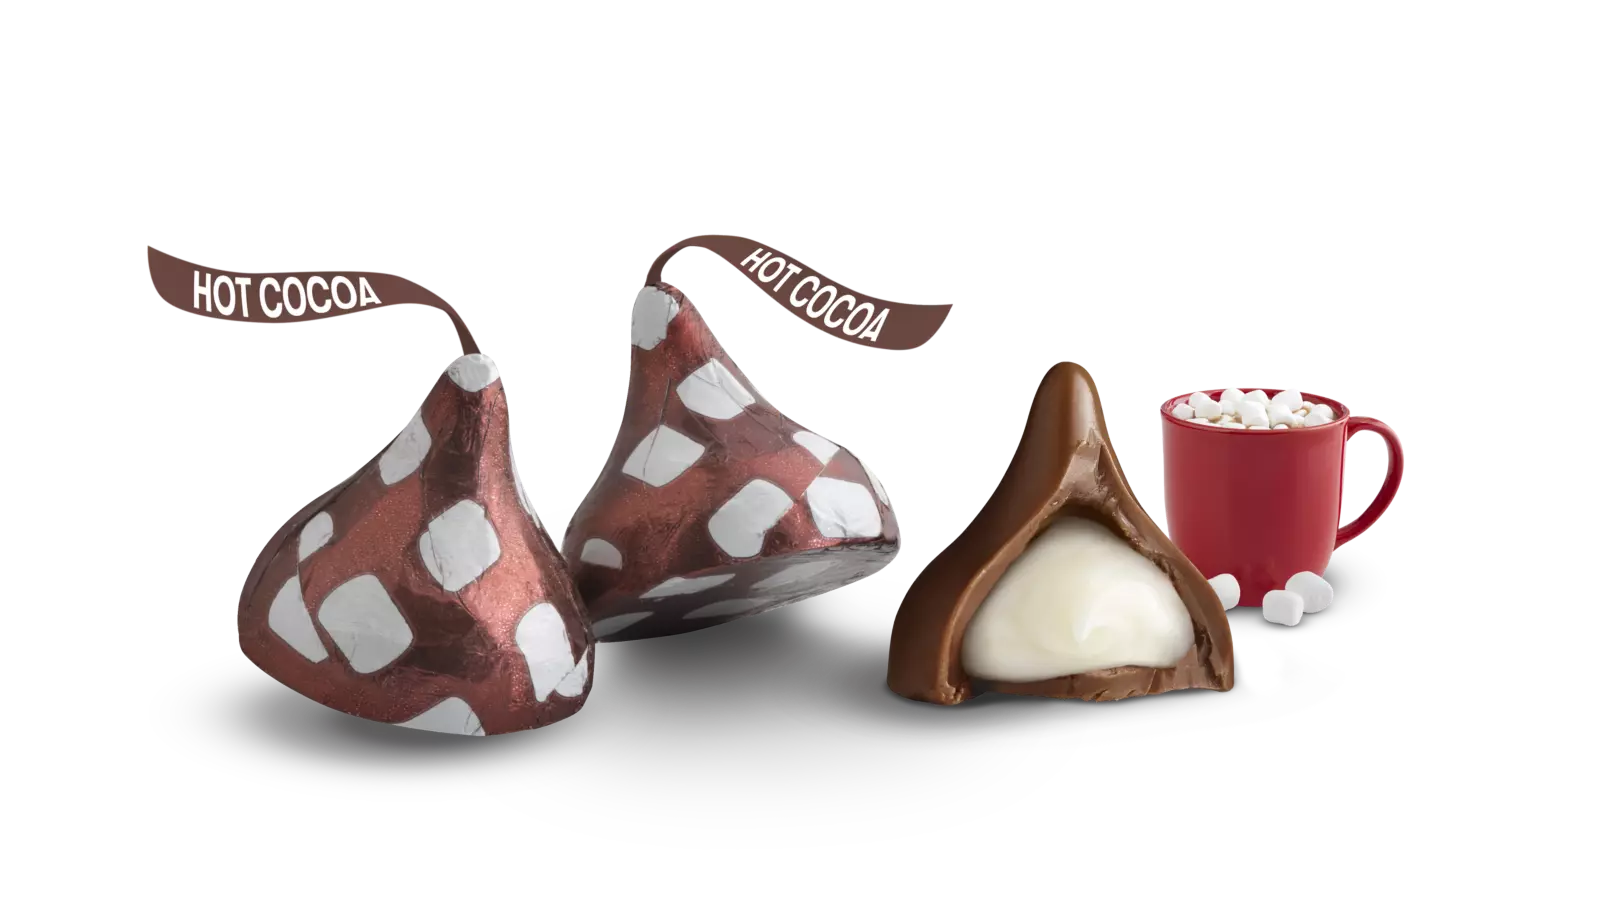 HERSHEY'S KISSES Hot Cocoa Candy, 9 oz bag - Out of Package